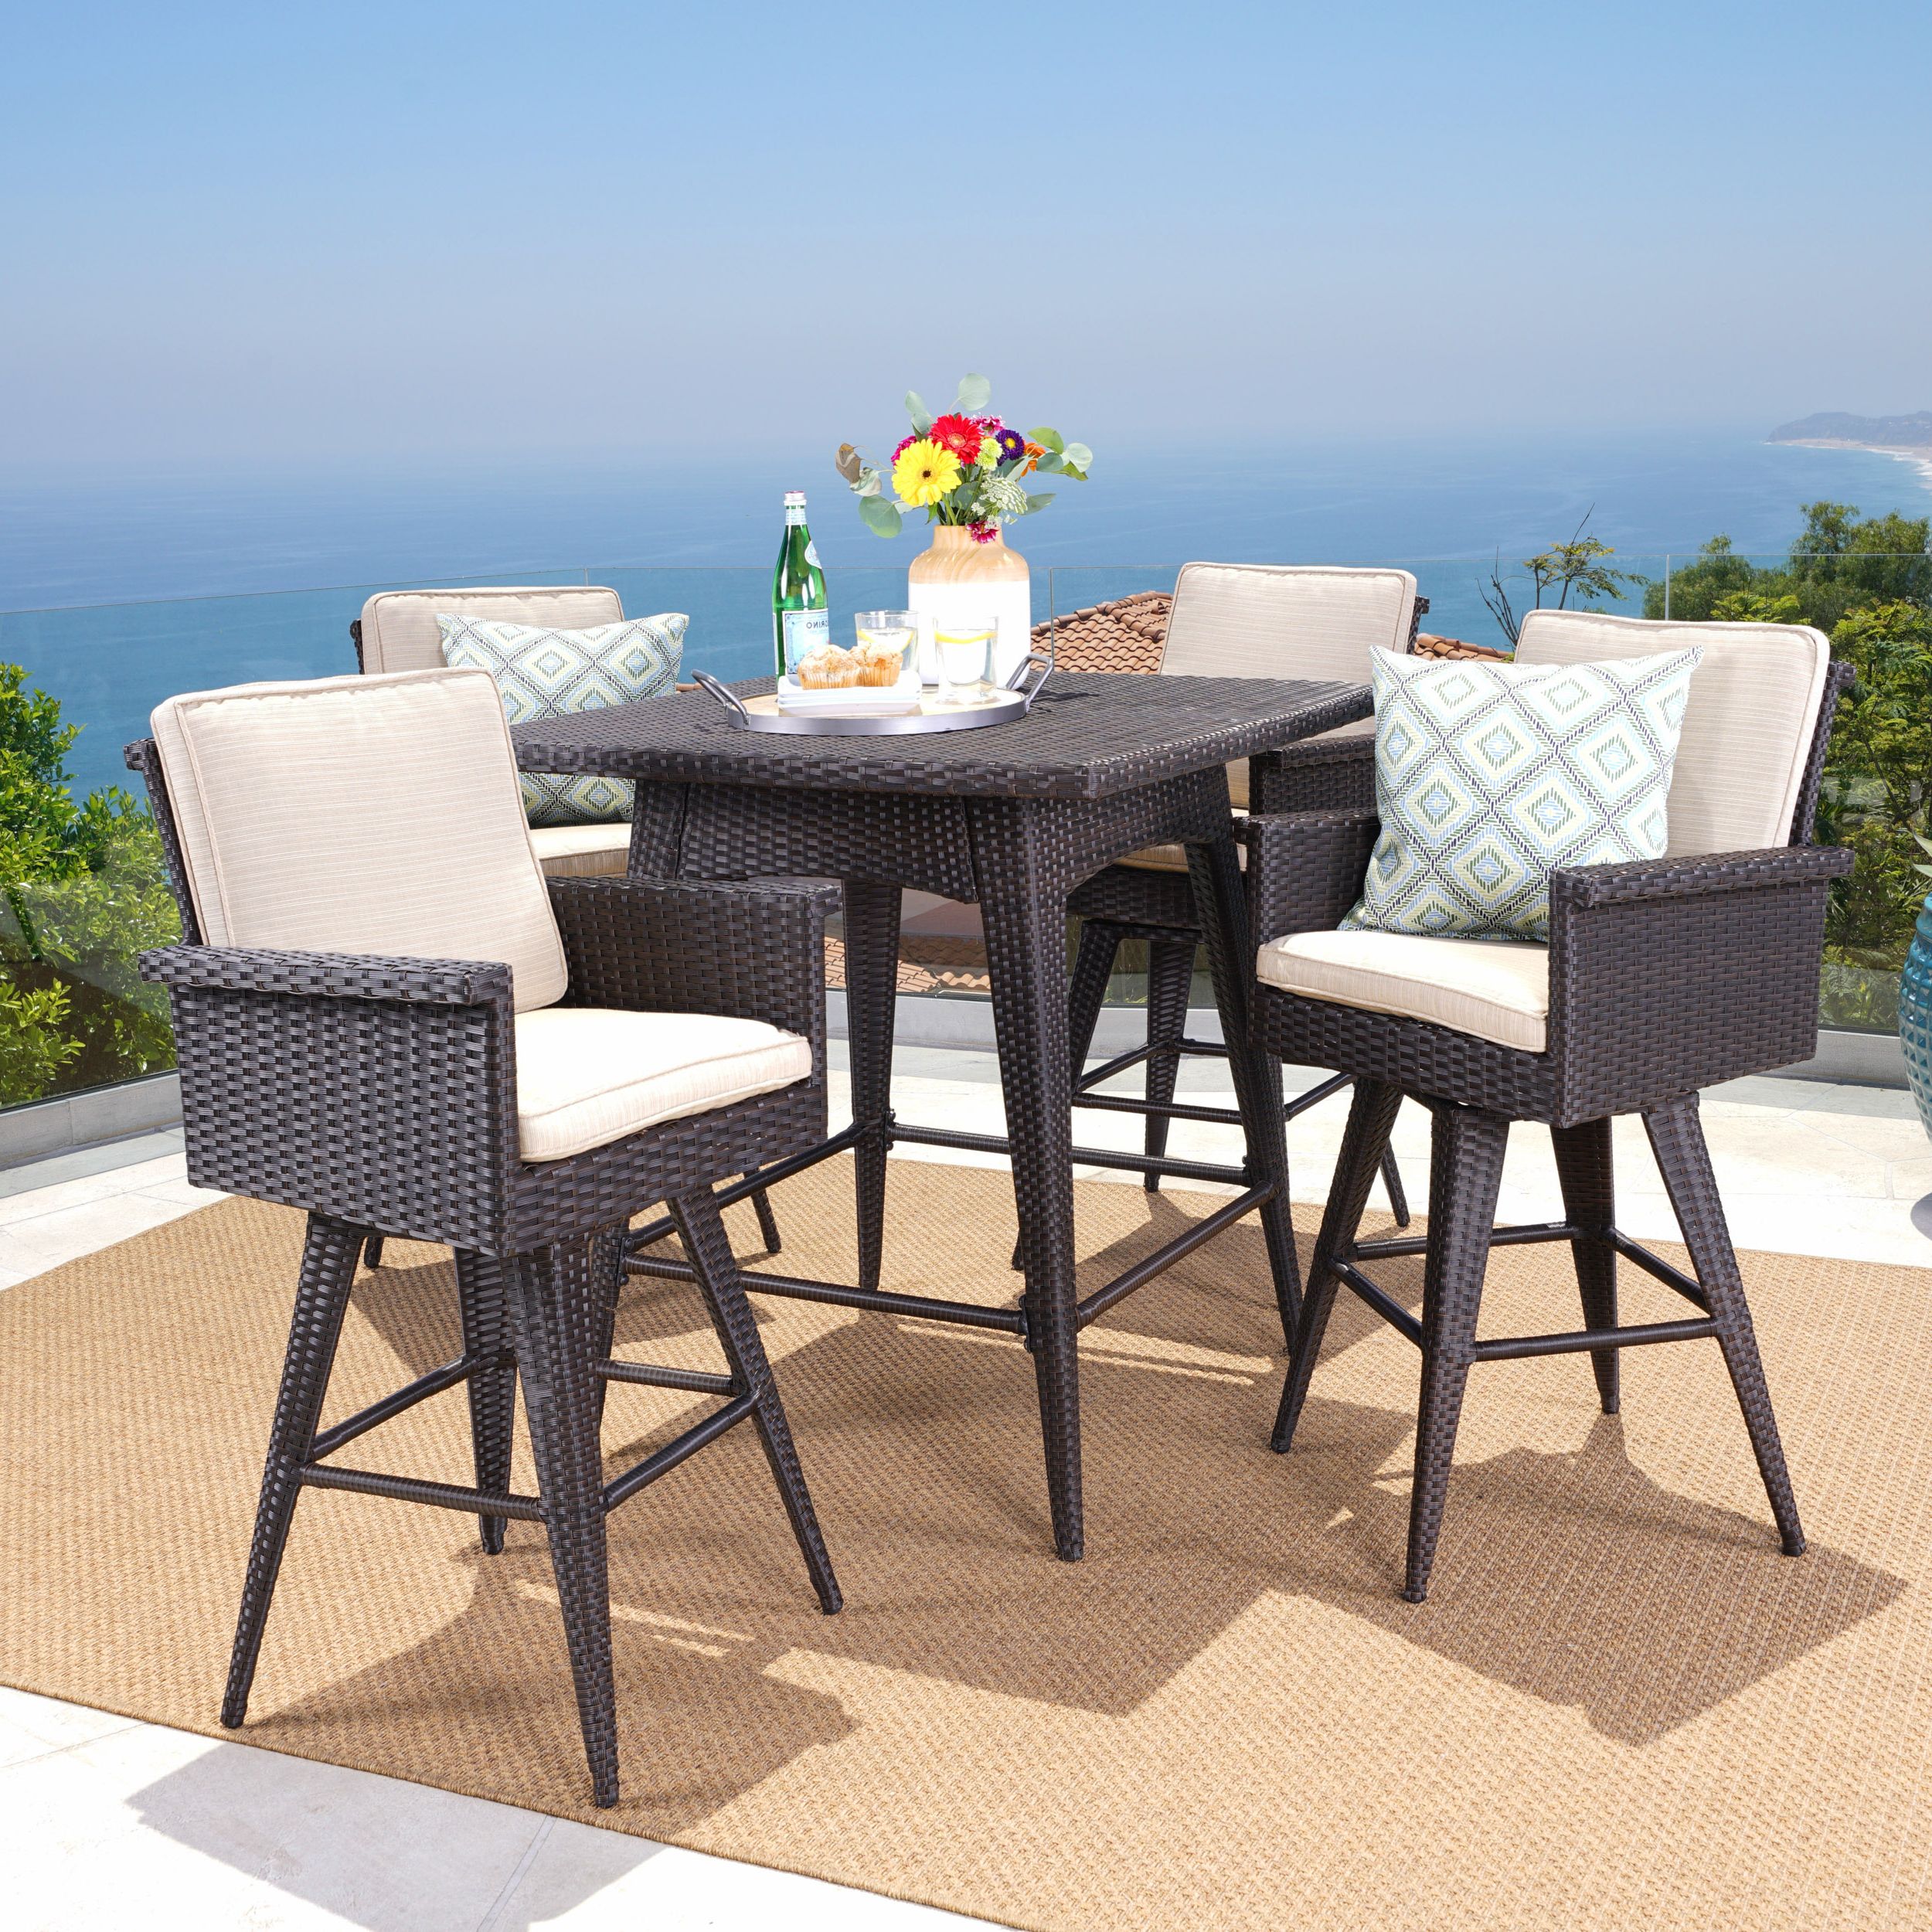 Marianne Outdoor 5 Piece Wicker Bar Height Dining Set With Sunbrella For Widely Used Wicker 5 Piece Round Patio Dining Sets (View 5 of 15)